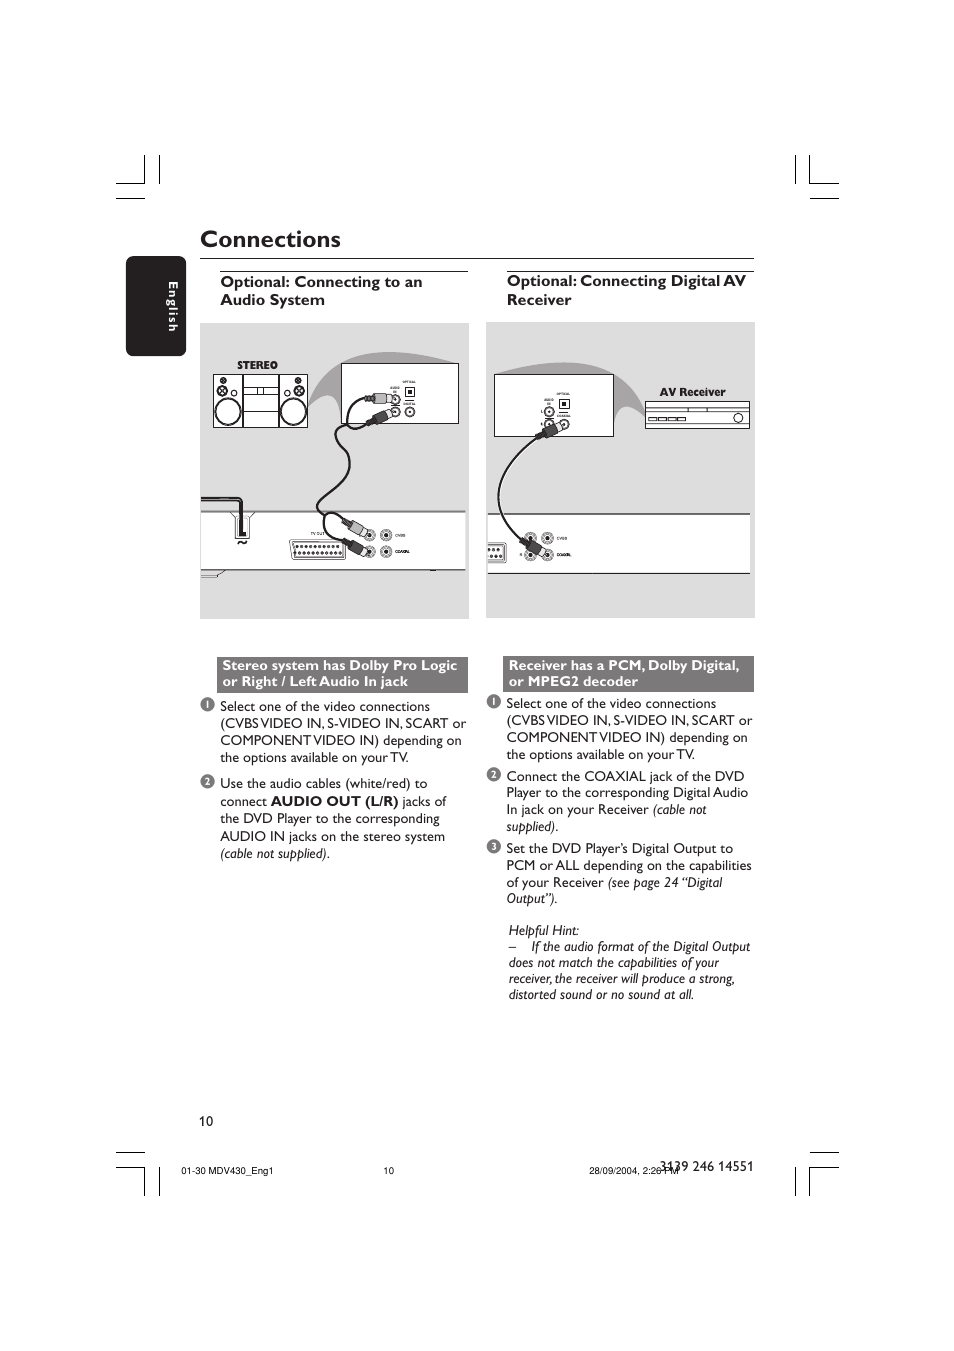 Connections | Philips Magnavox MDV430 User Manual | Page 10 / 30